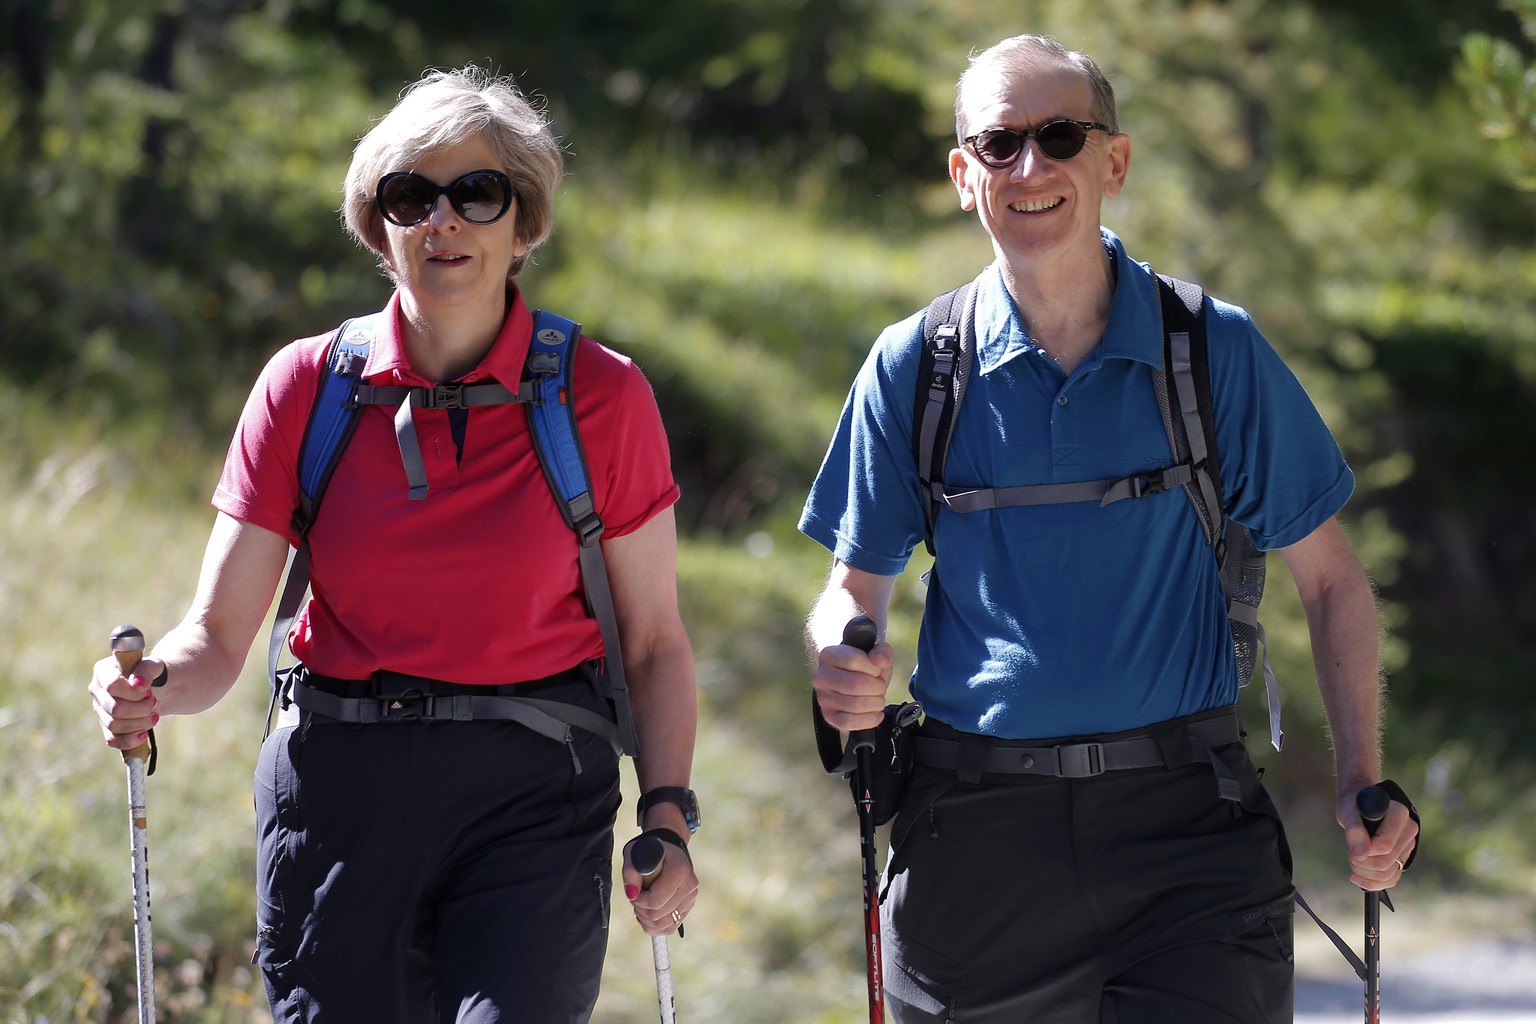 British Prime Minister Theresa May, walks in a forest with her husband Philip at the start of a summer holiday in the Alps in Switzerland on Friday Aug. 12, 2016. (Marco Bertorello/Pool via AP)